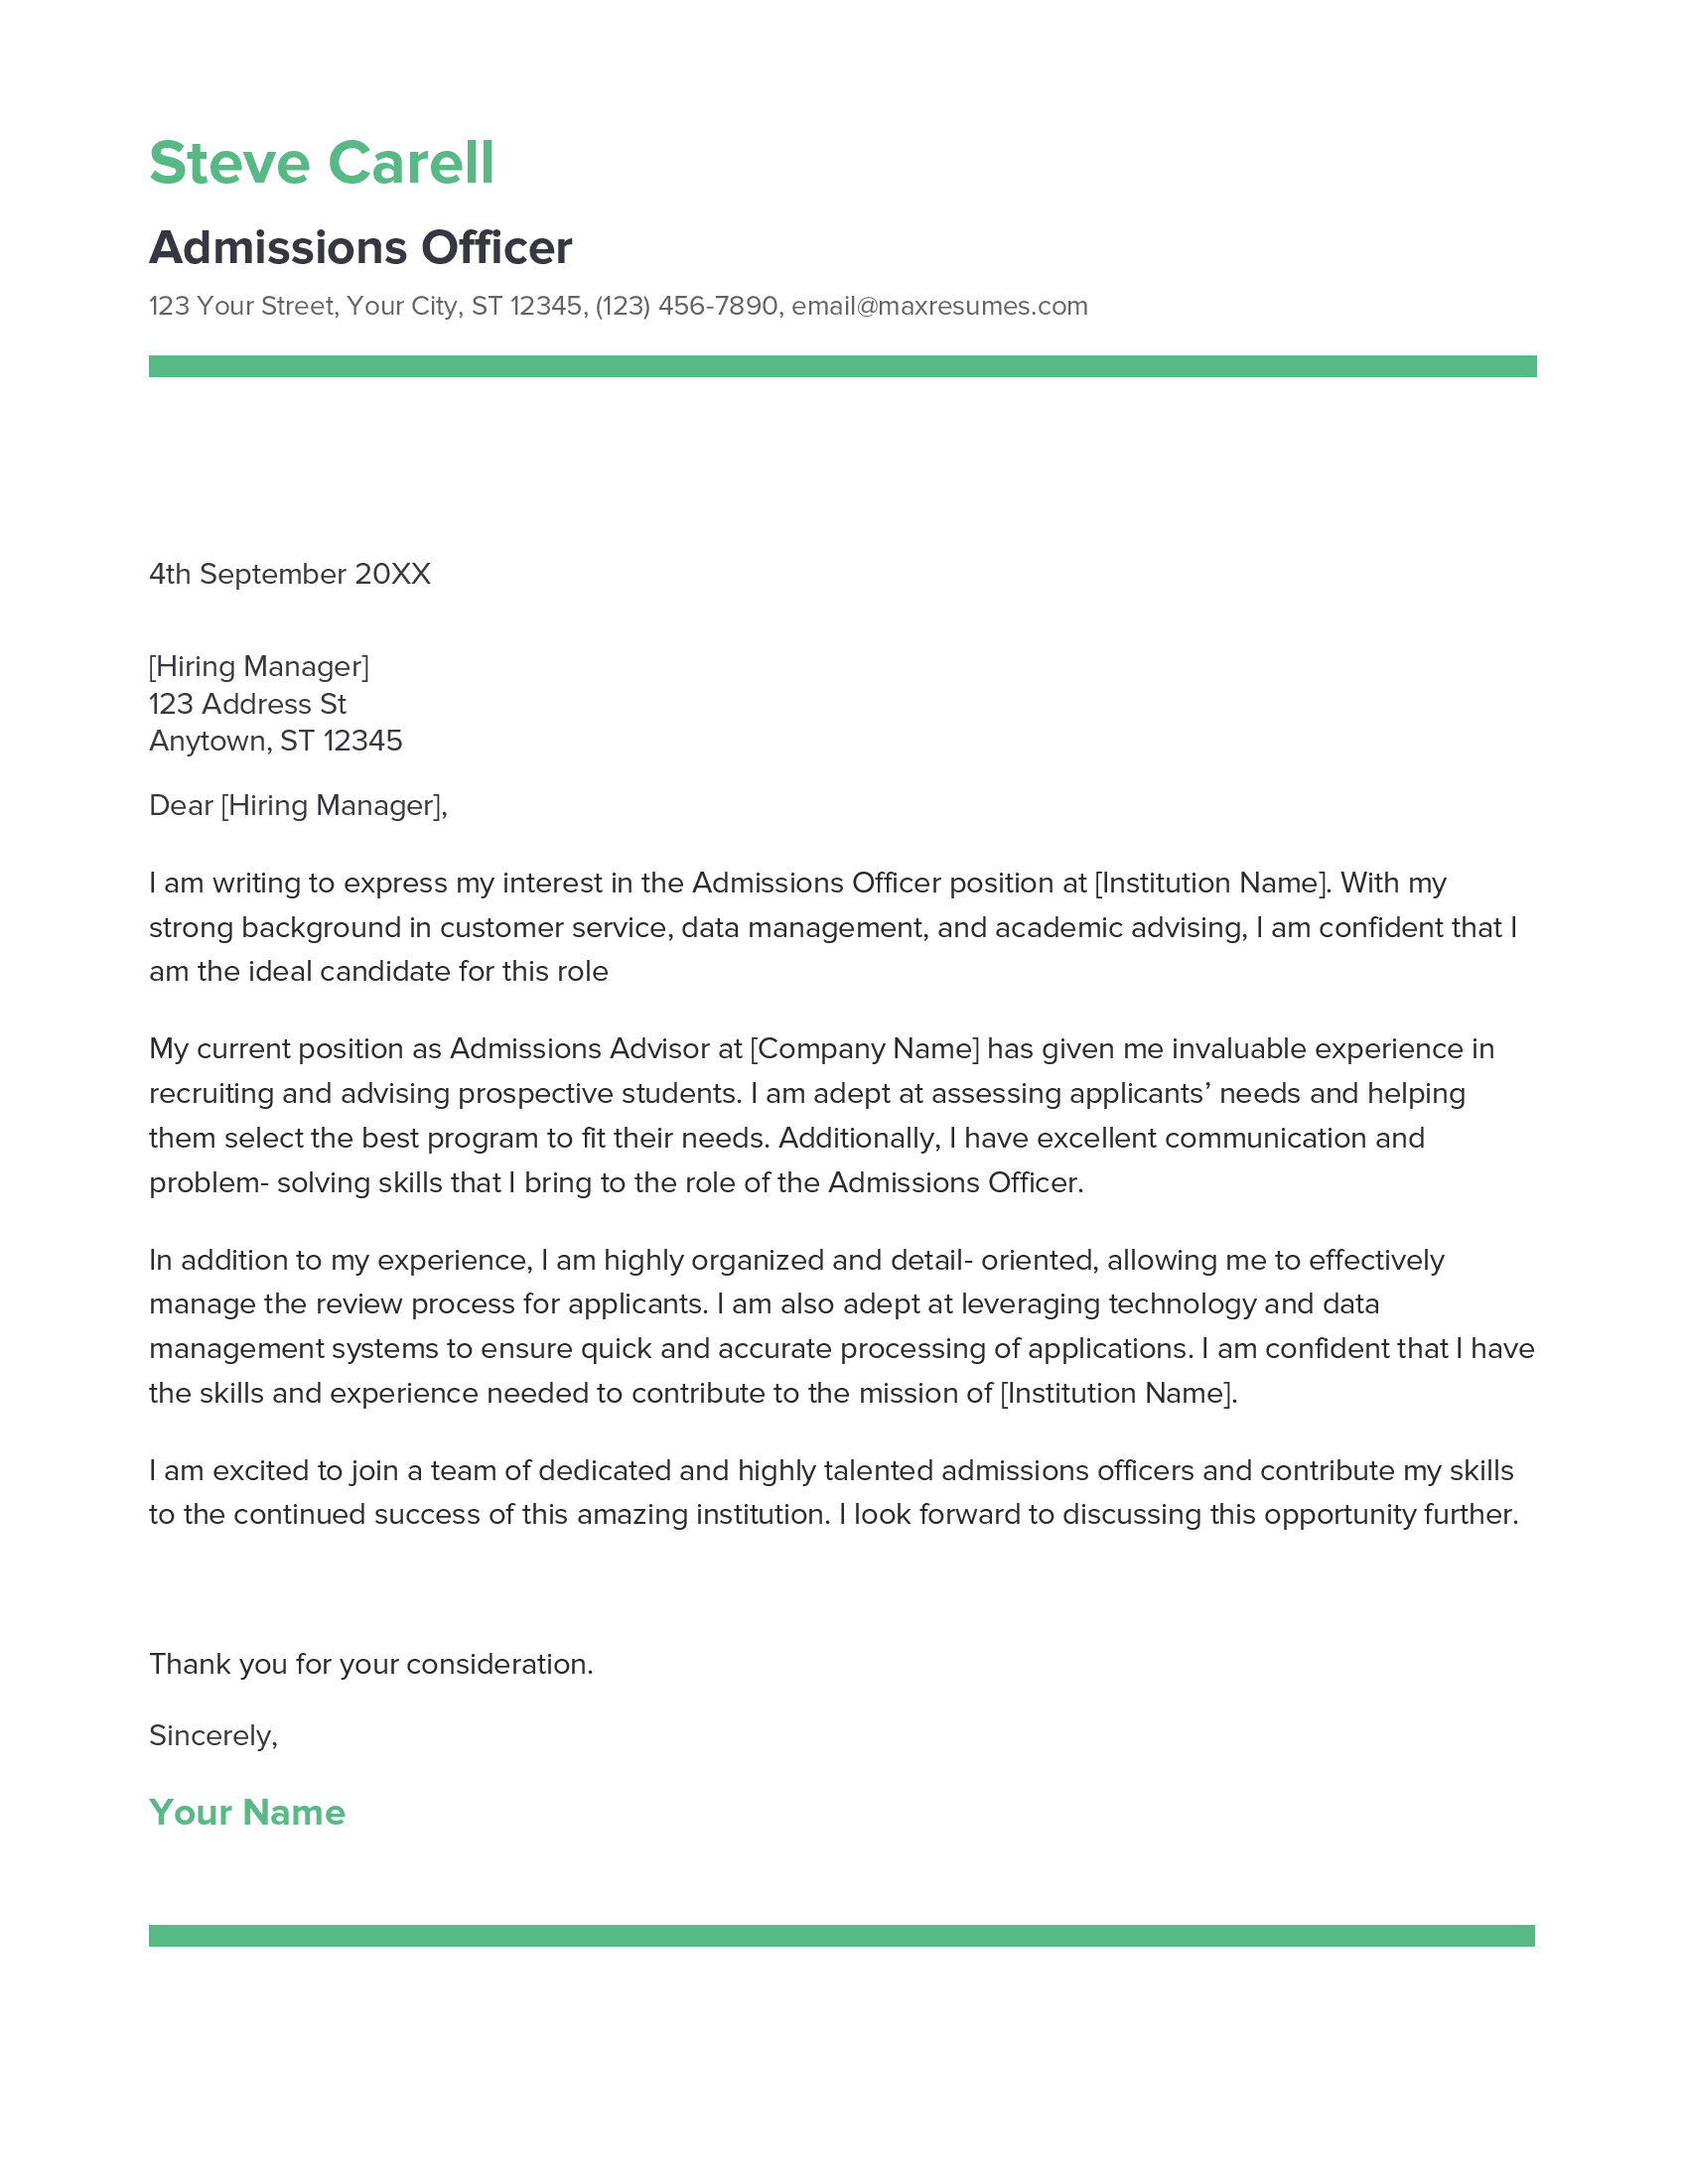 Admissions Officer Cover Letter Example